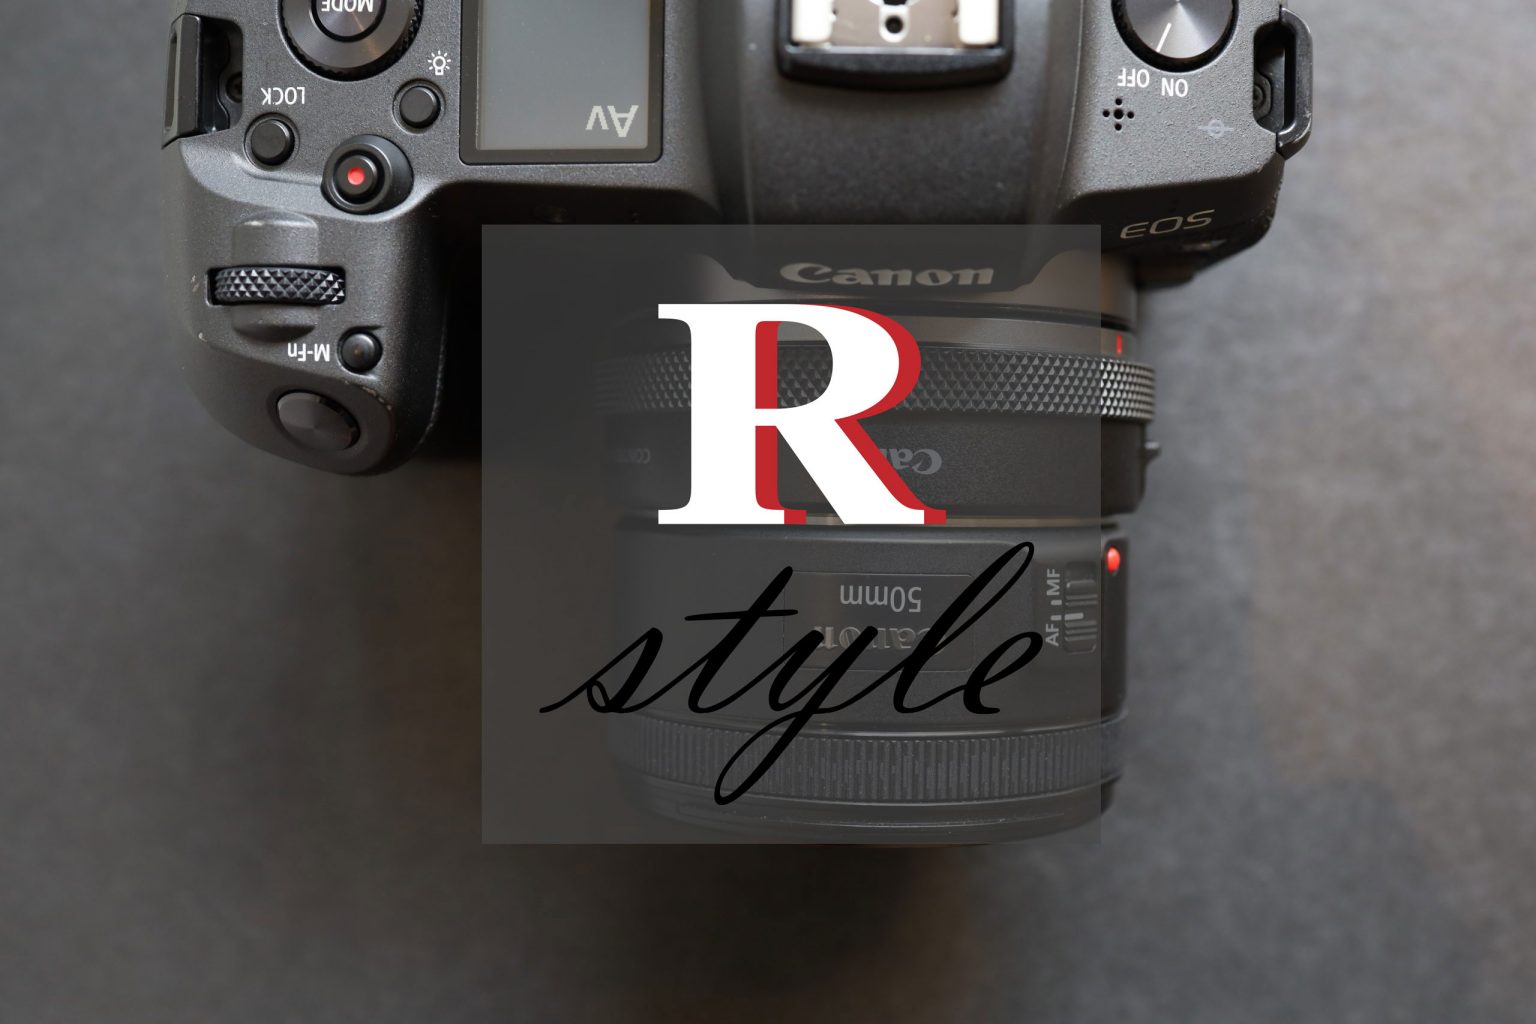 【Canon】～R STYLE MIX～EOS R×EF 50mm F1.8 STM